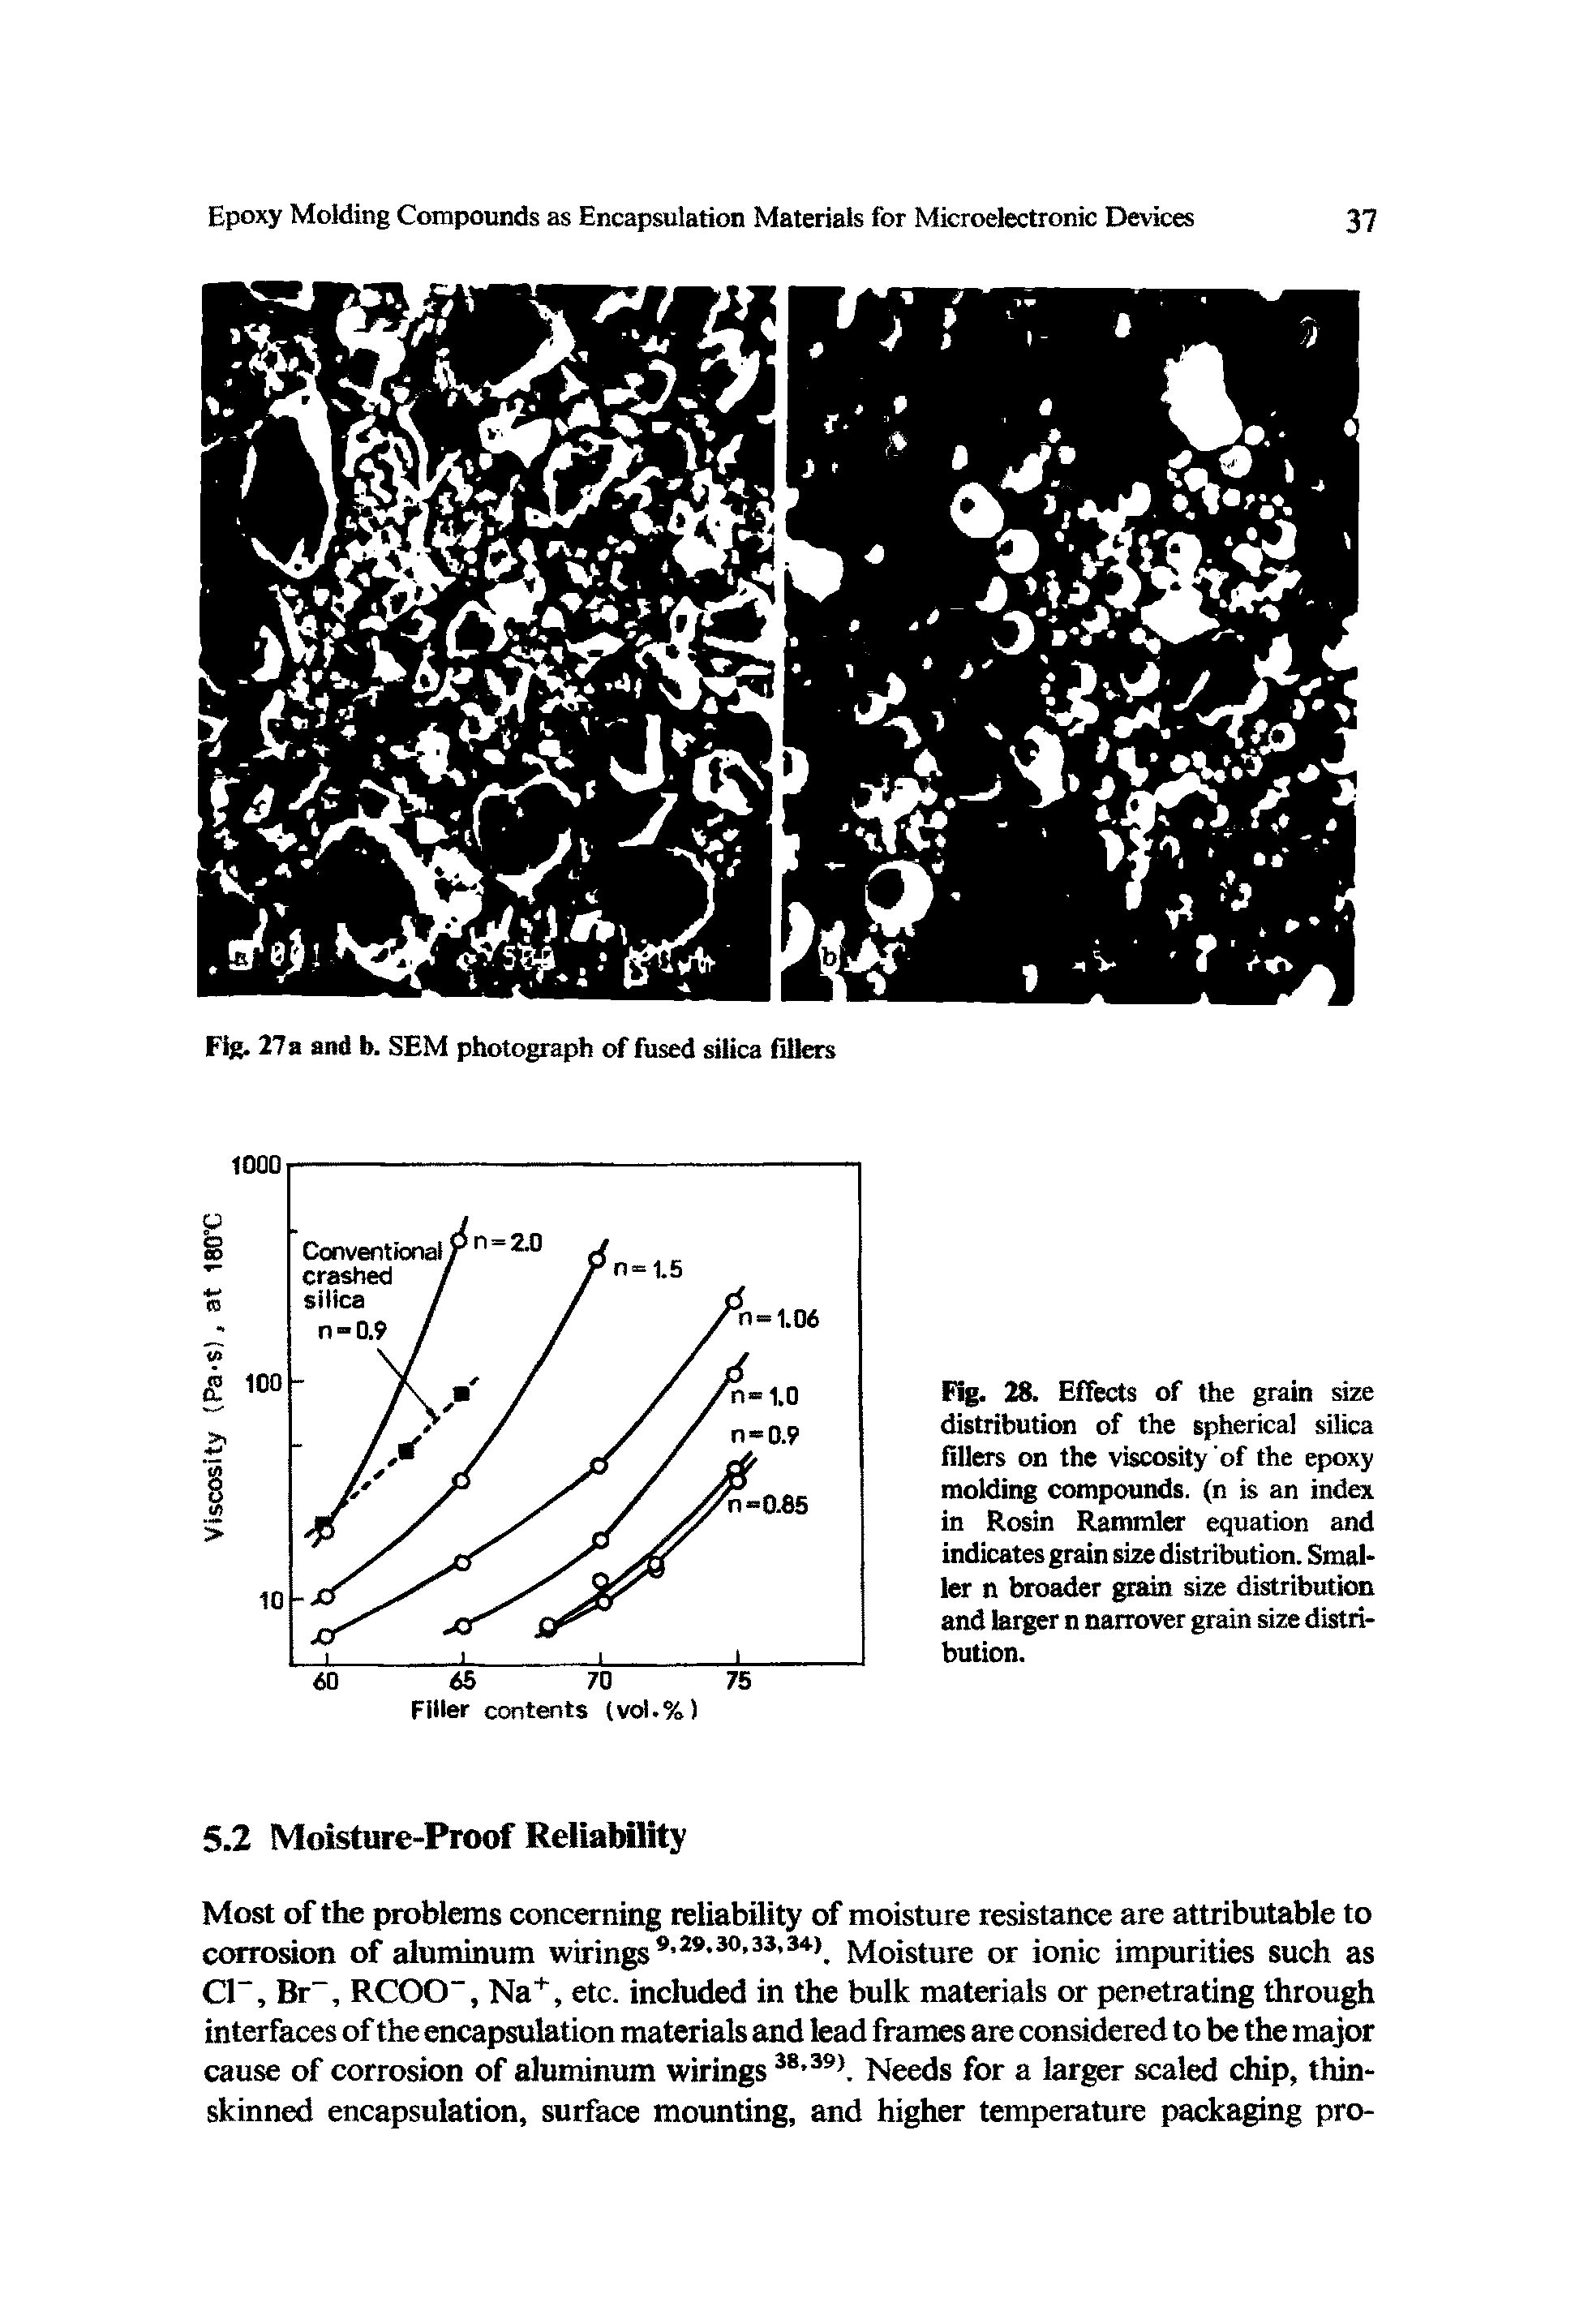 Fig. 28. Effects of the grain aze distributicHi of the spherical silica fillers on the viscosity of the epoxy moldiiig compounds, (n is an index in Rosin Rammler equation and indicates grain size distribution. Smaller n broader grain size distribution and larger n nanover grain size distrir bution.